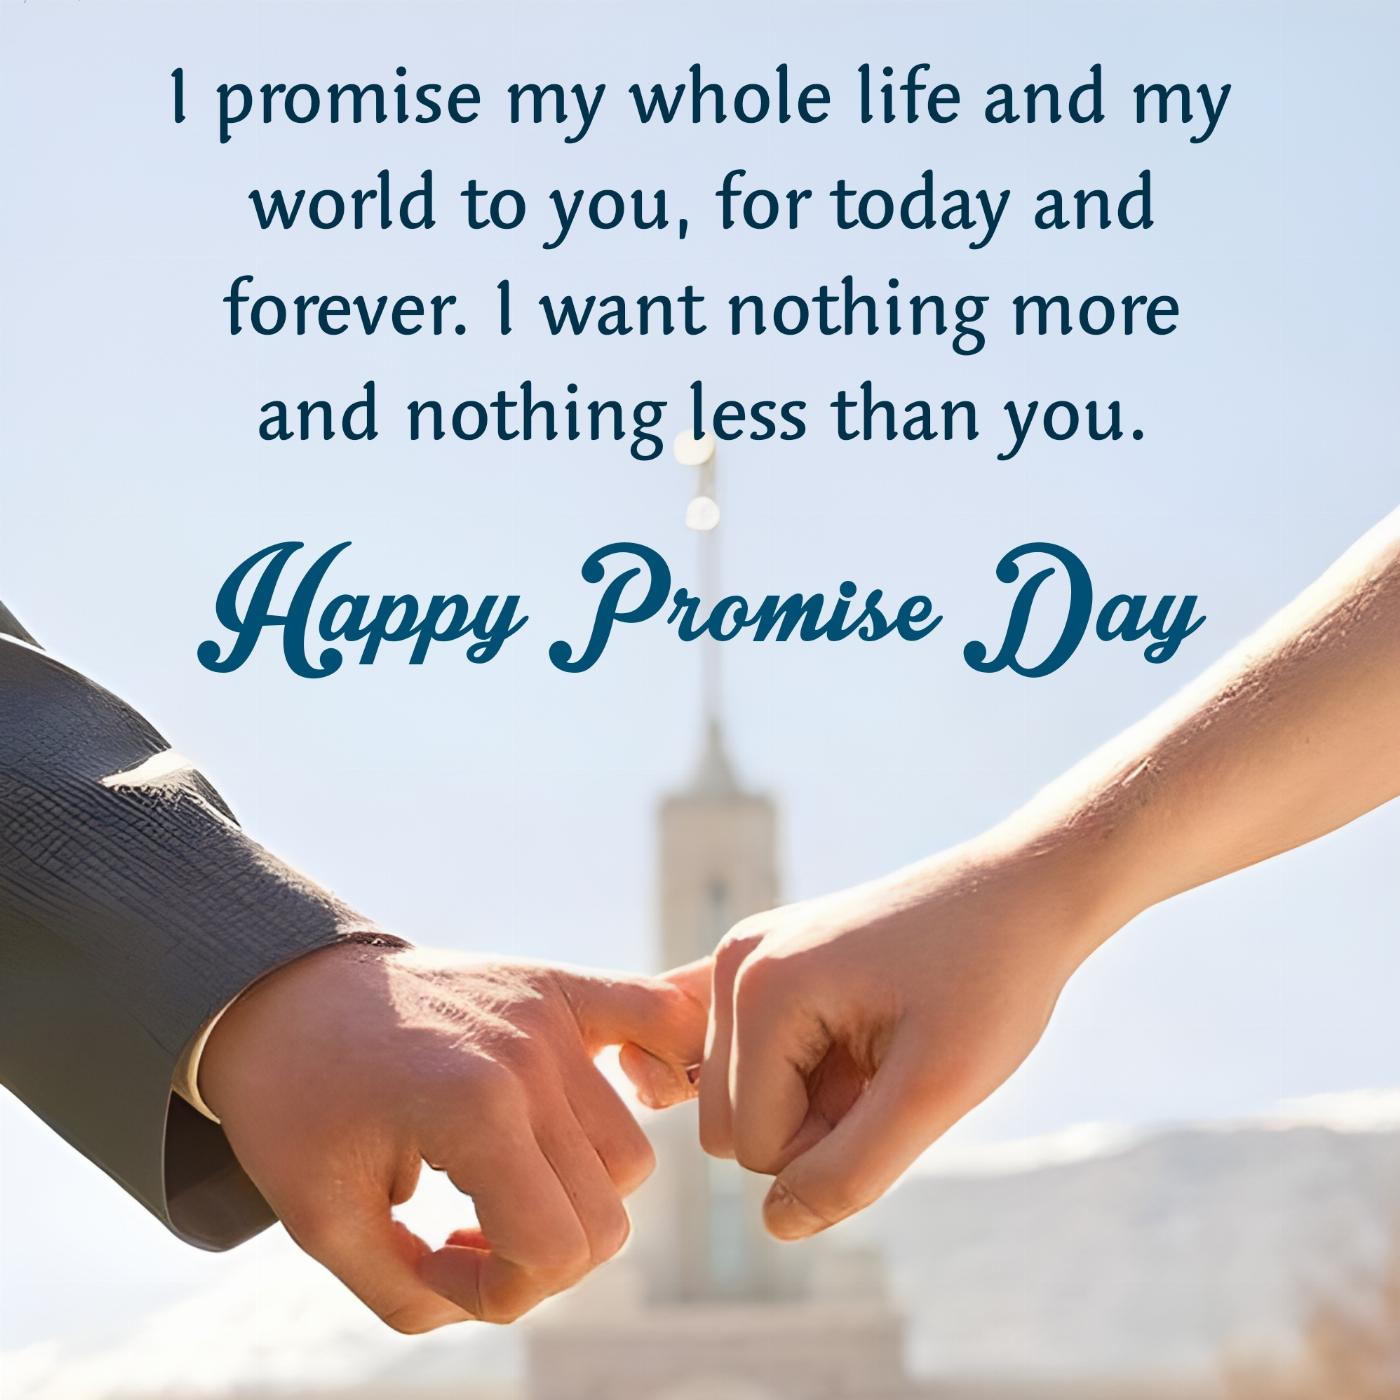 I promise my whole life and my world to you for today and forever